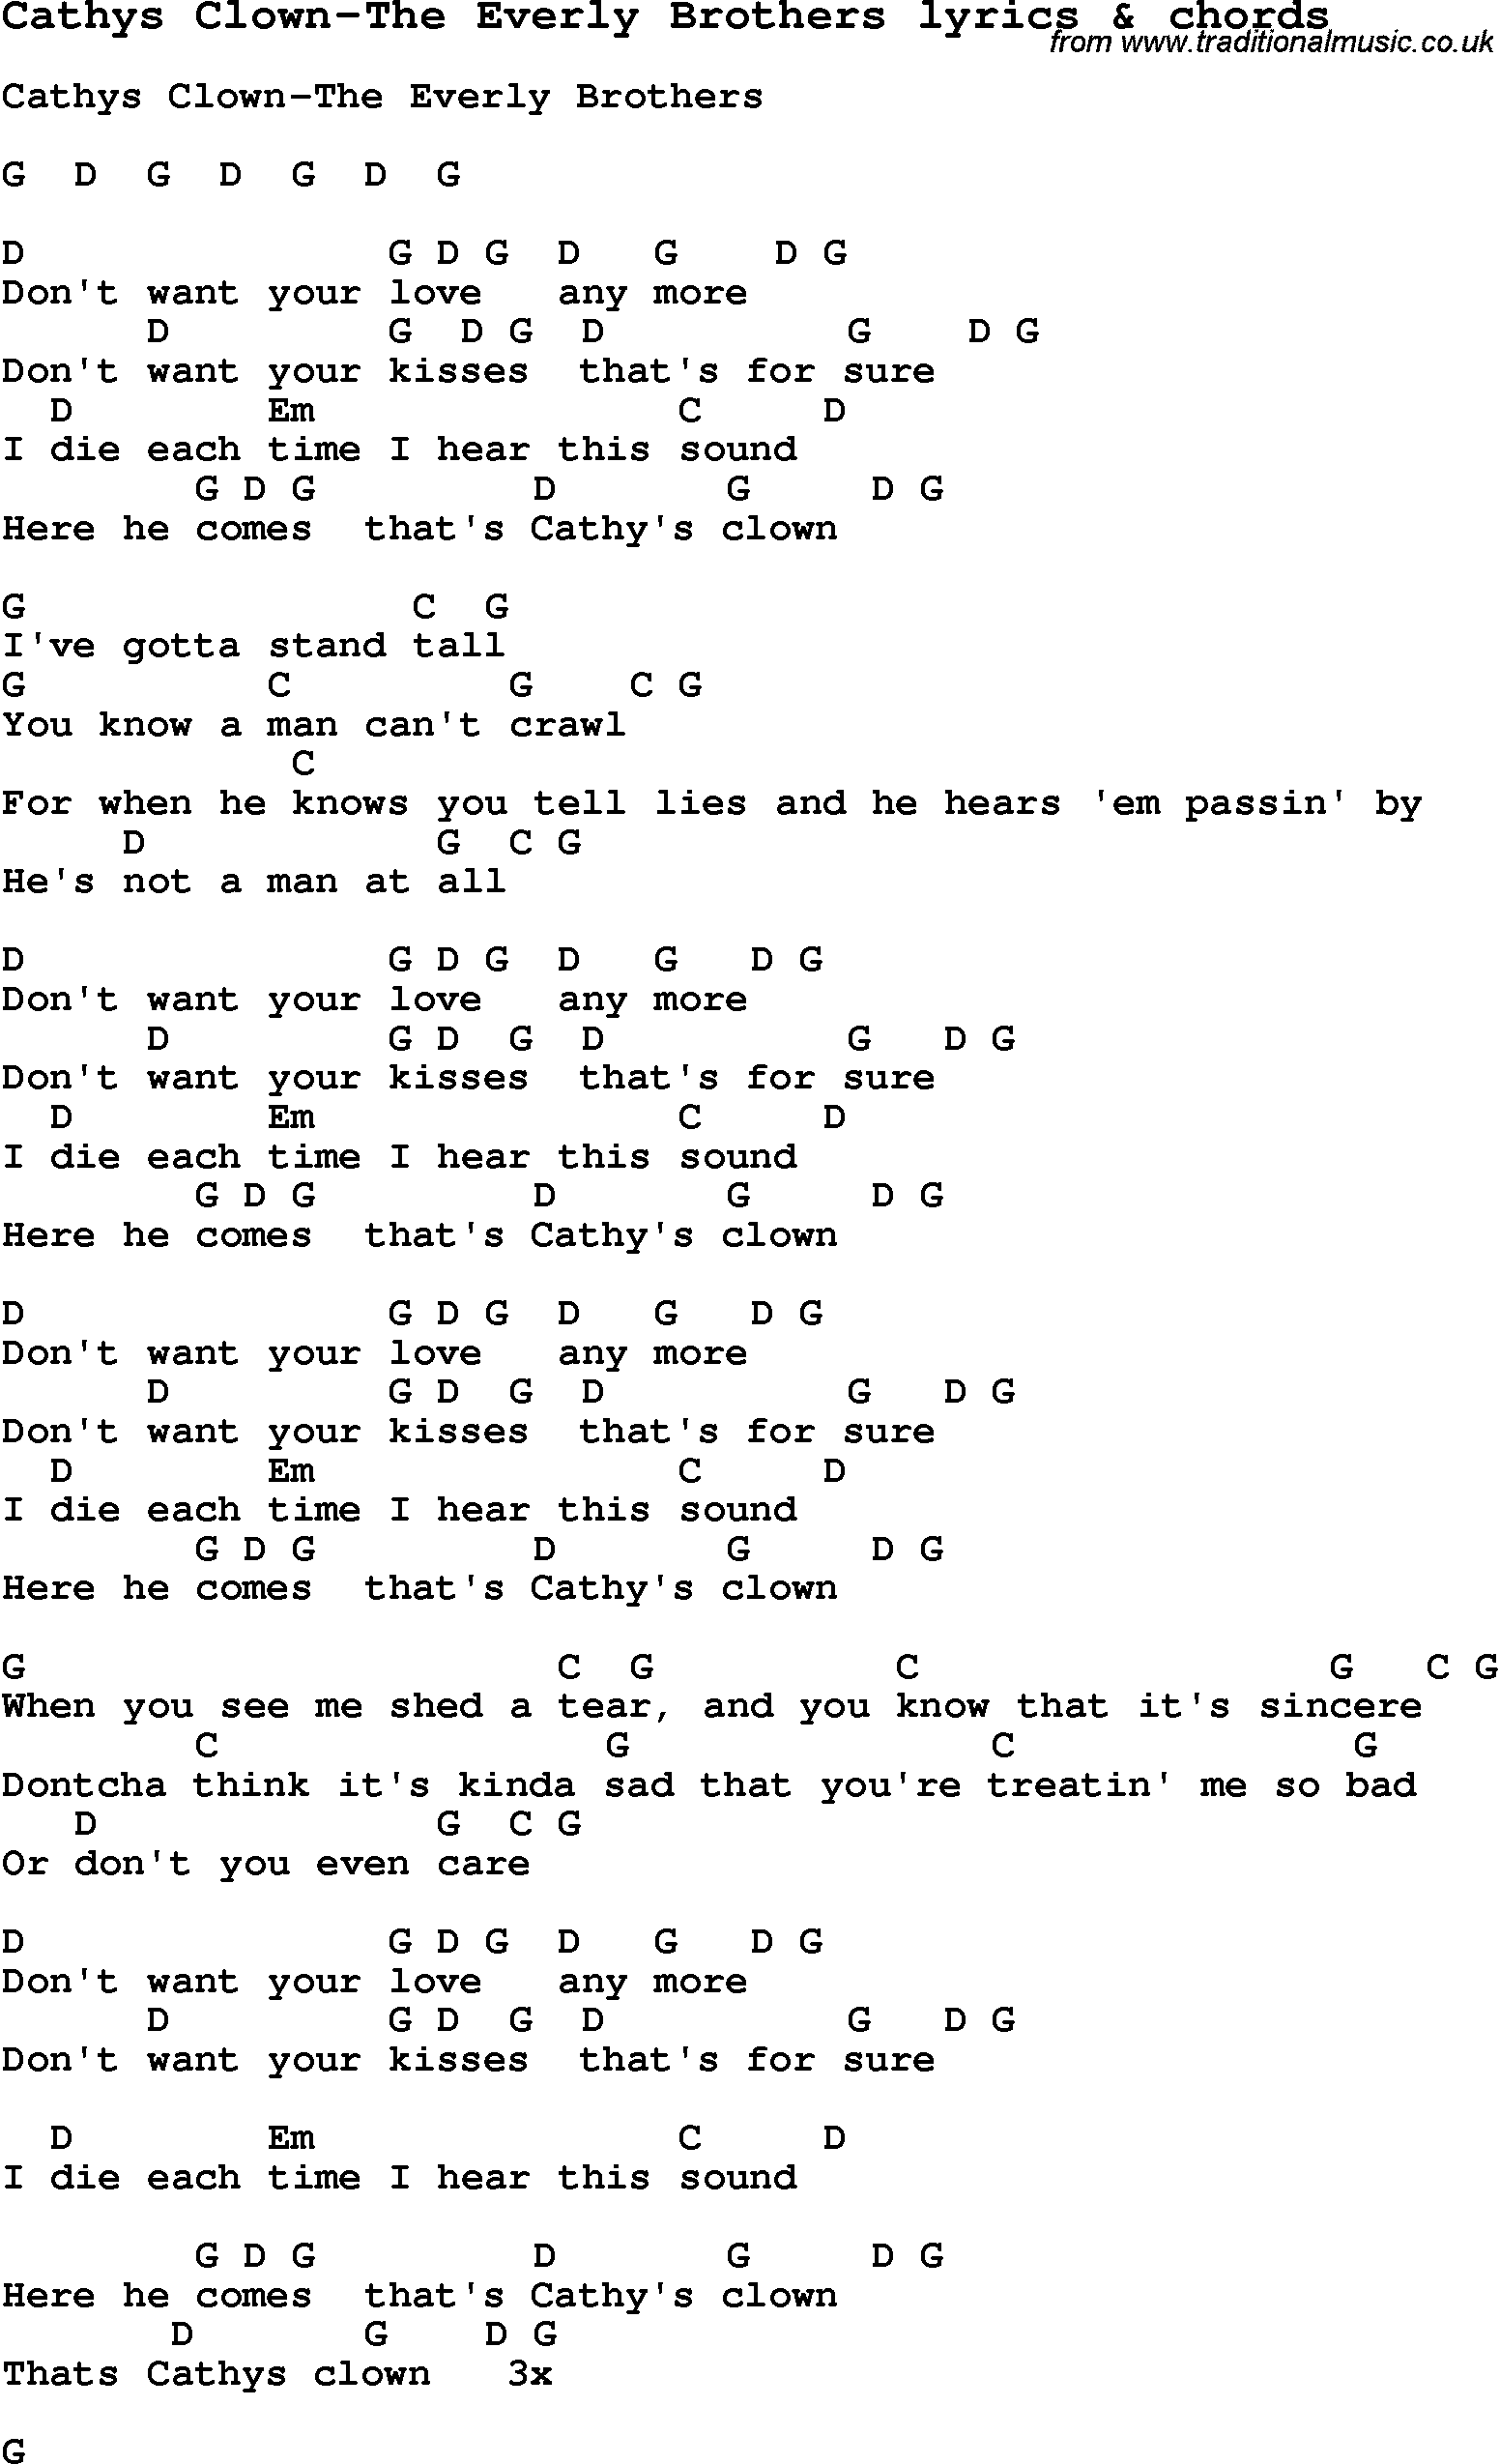 Love Song Lyrics for: Cathys Clown-The Everly Brothers with chords for Ukulele, Guitar Banjo etc.